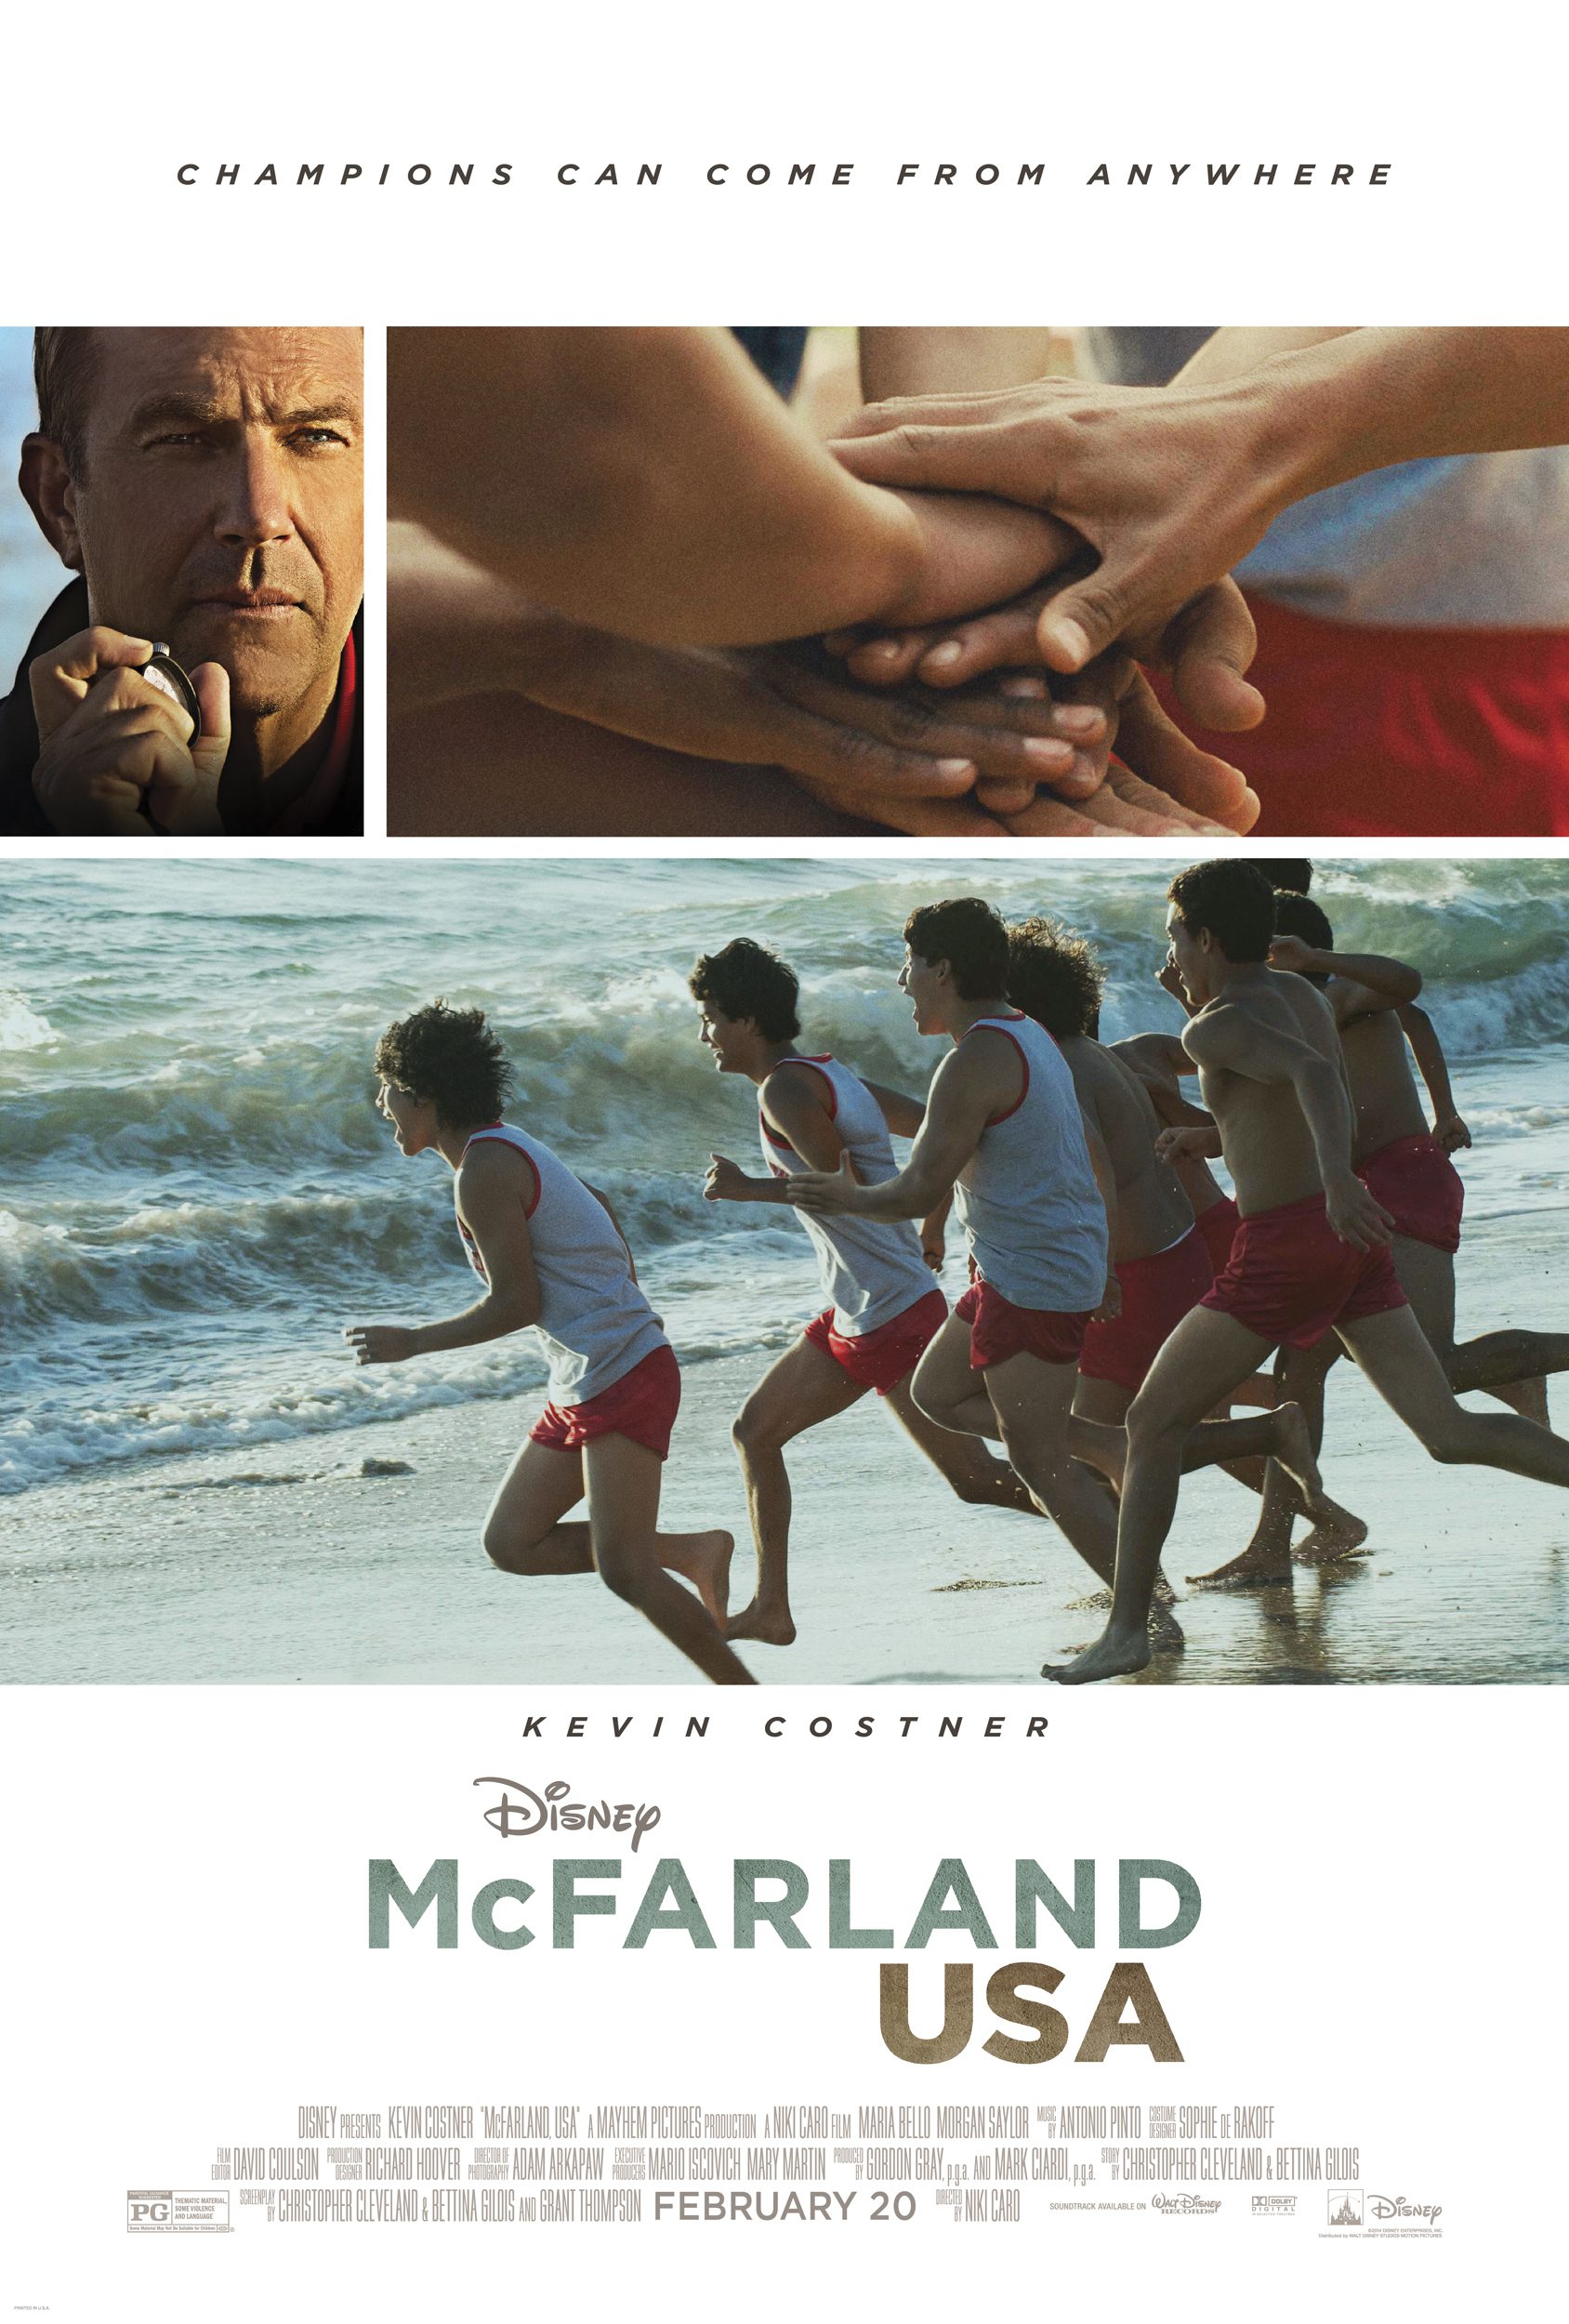 Pictures from the World Premiere of McFARLAND, USA #McFarlandUSA